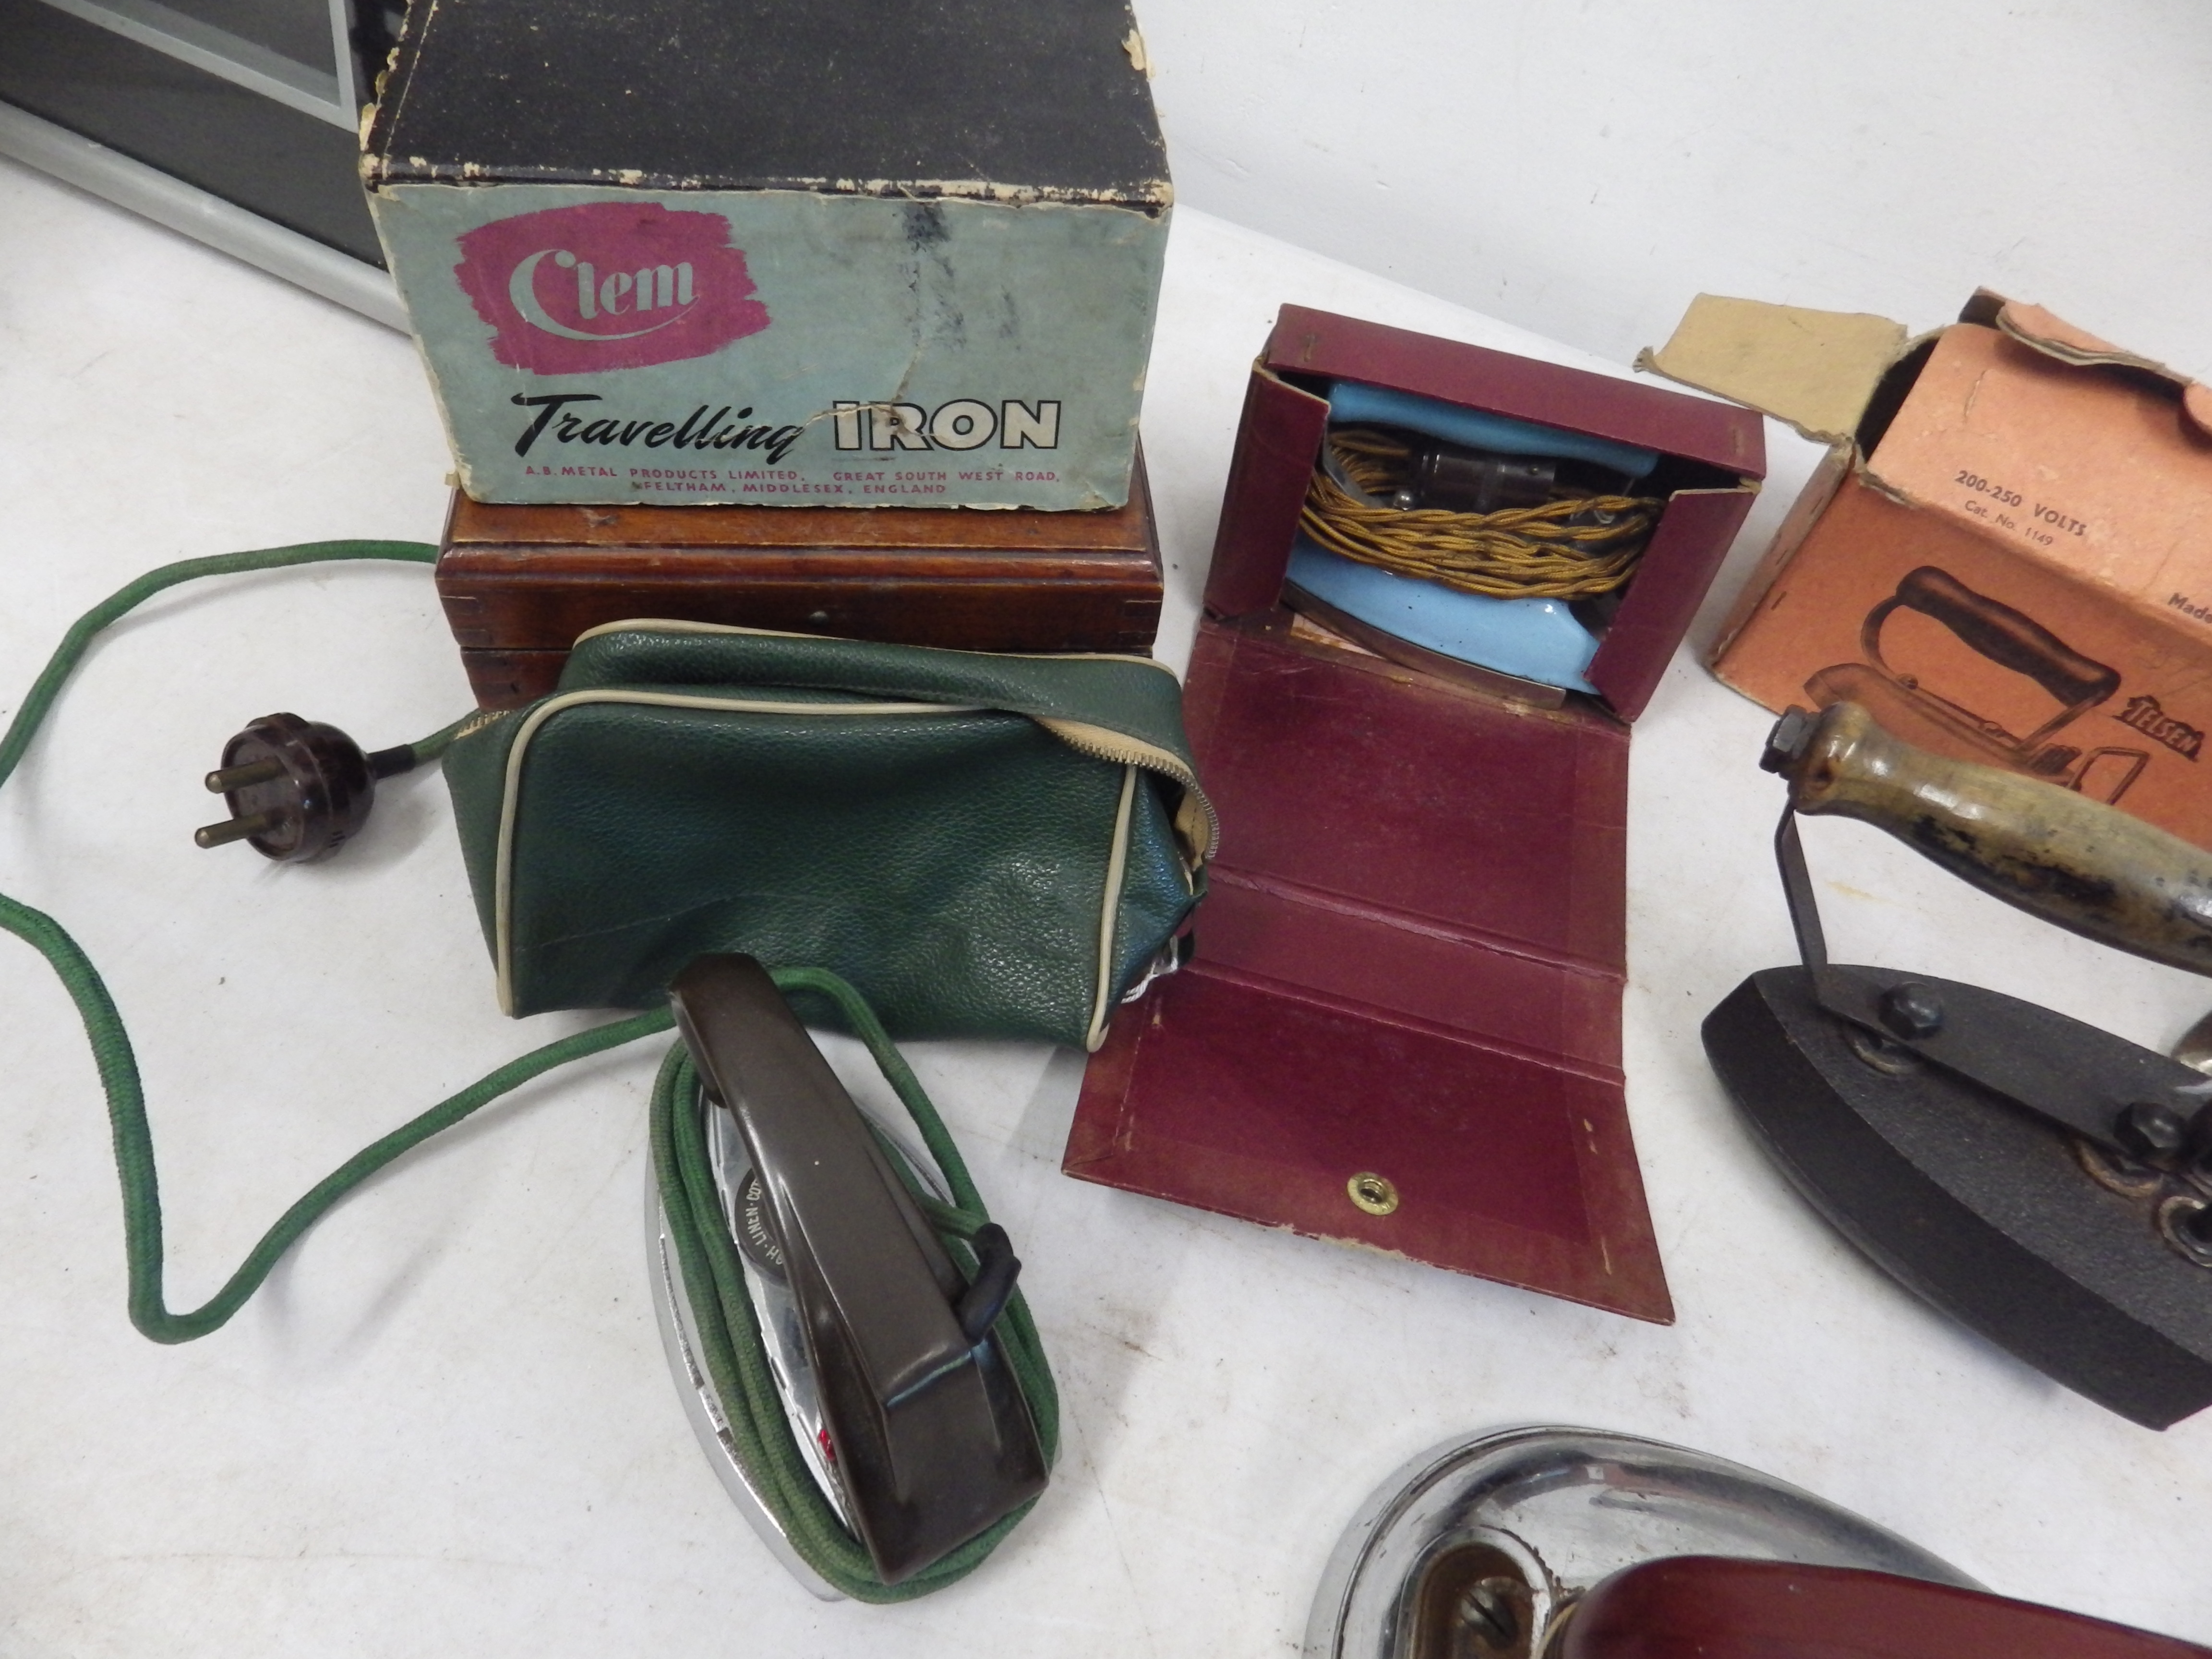 Assorted vintage electric and travel irons, some with original boxes and cases, all for display - Image 2 of 5